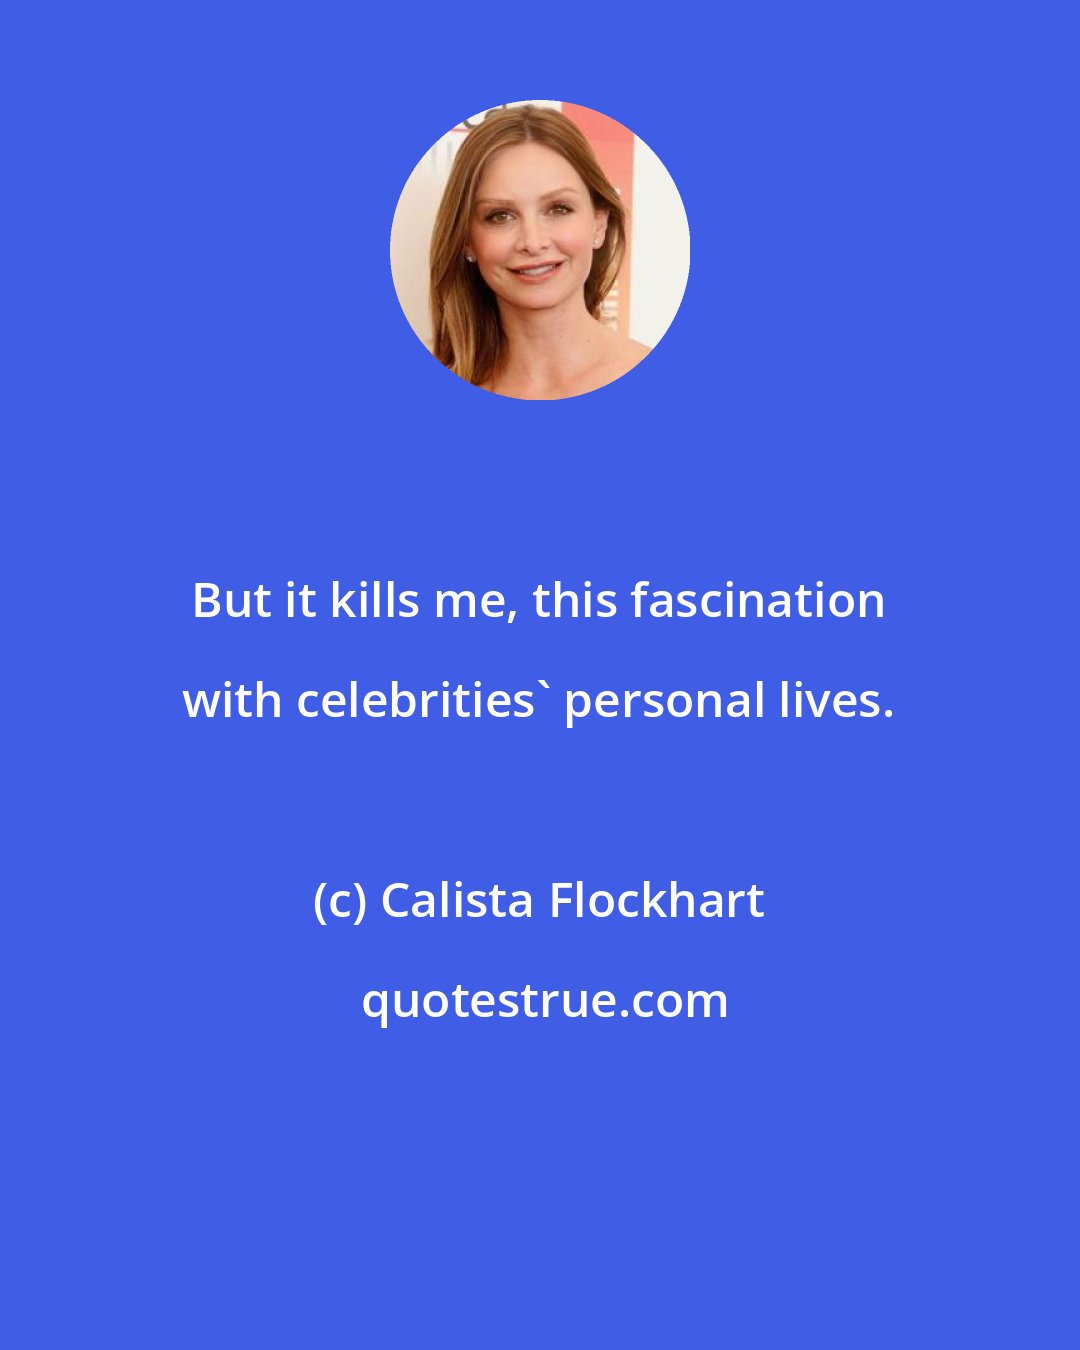 Calista Flockhart: But it kills me, this fascination with celebrities' personal lives.